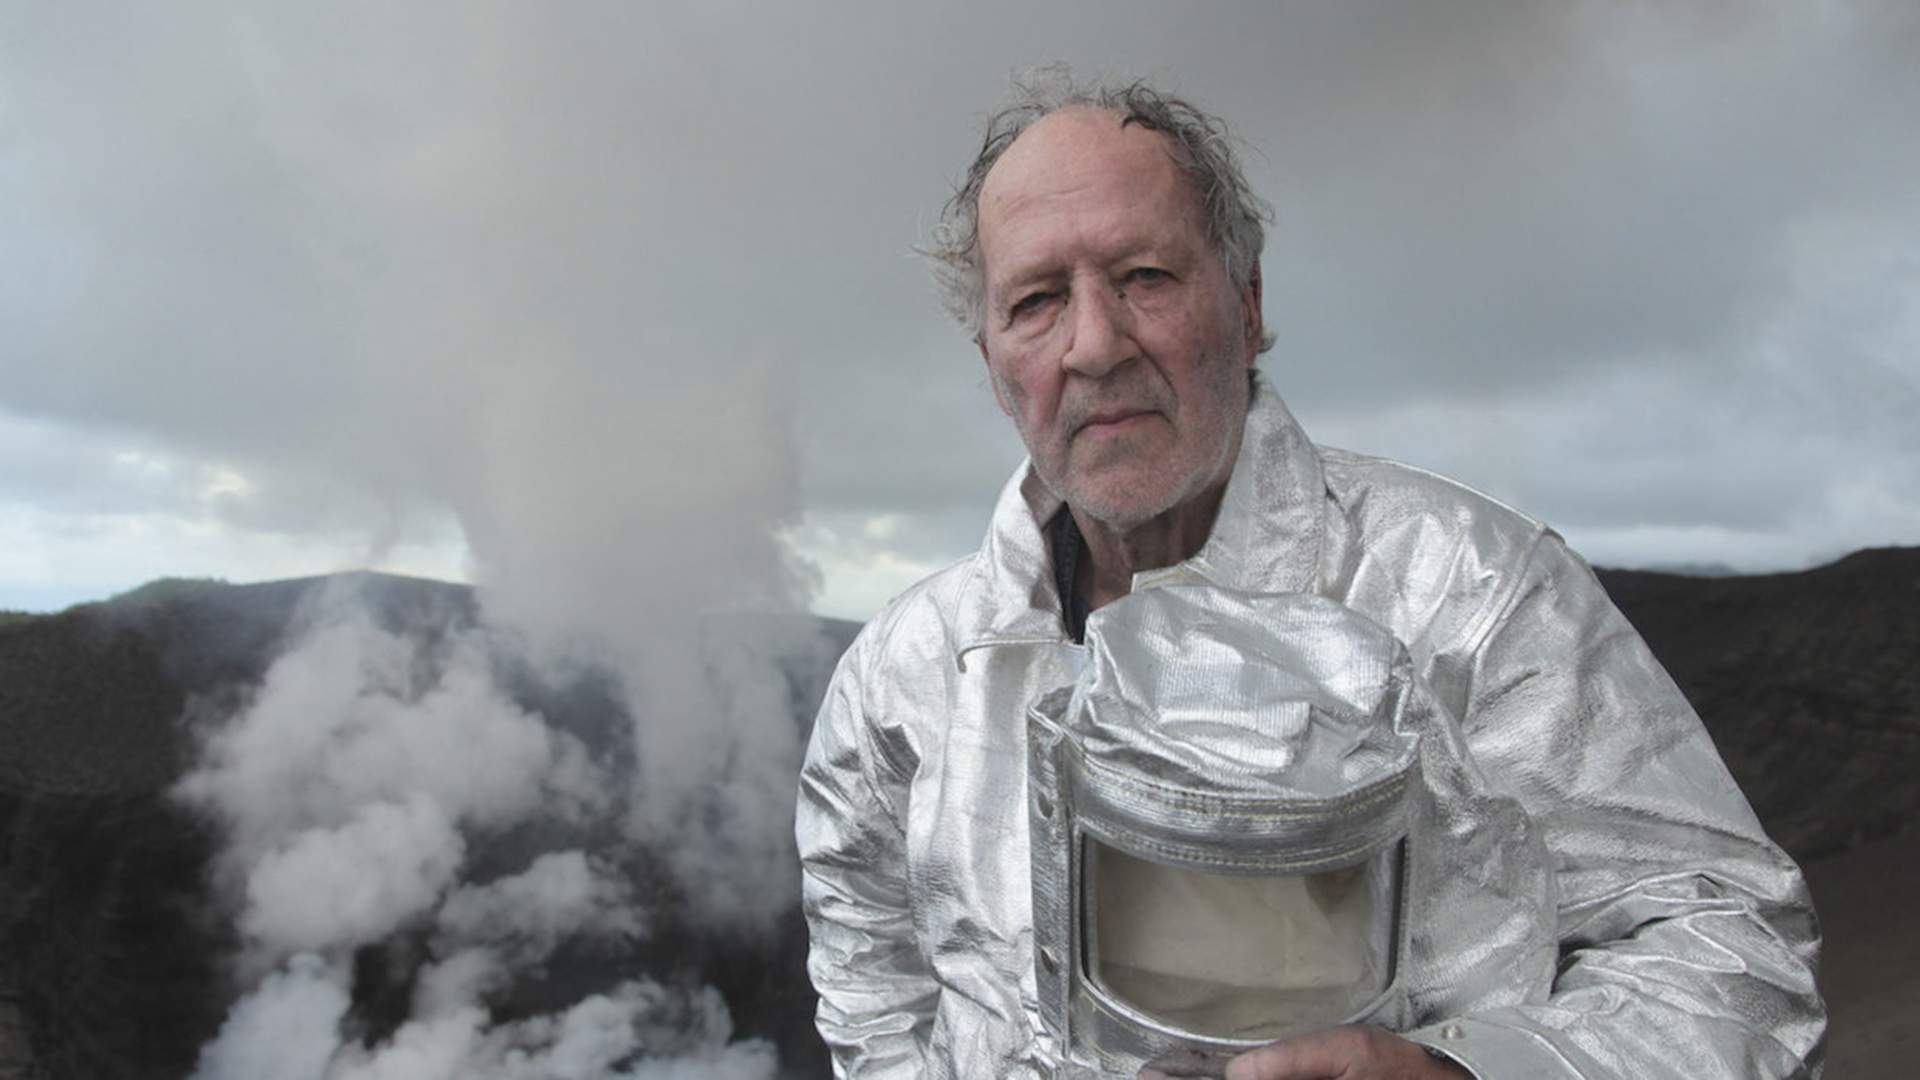 The Wrath and Reveries of Werner Herzog